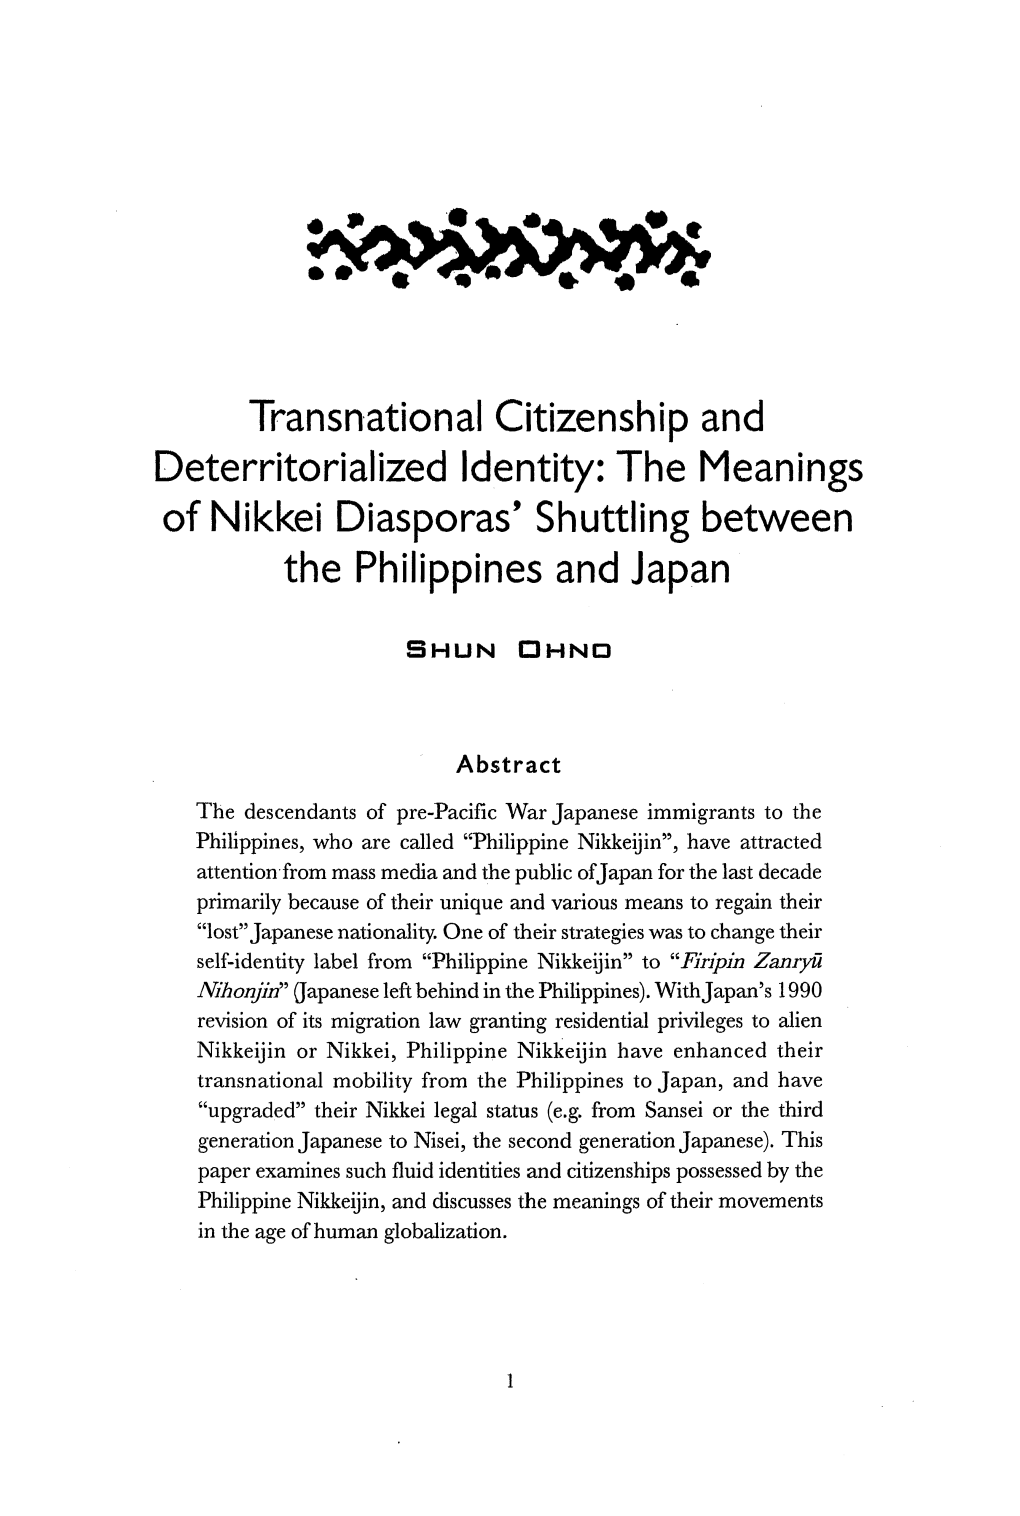 Transnational Citizenship and Deterritorialized Identity: the Meanings of Nikkei Diasporas' Shuttling Between the Philippines and Japan